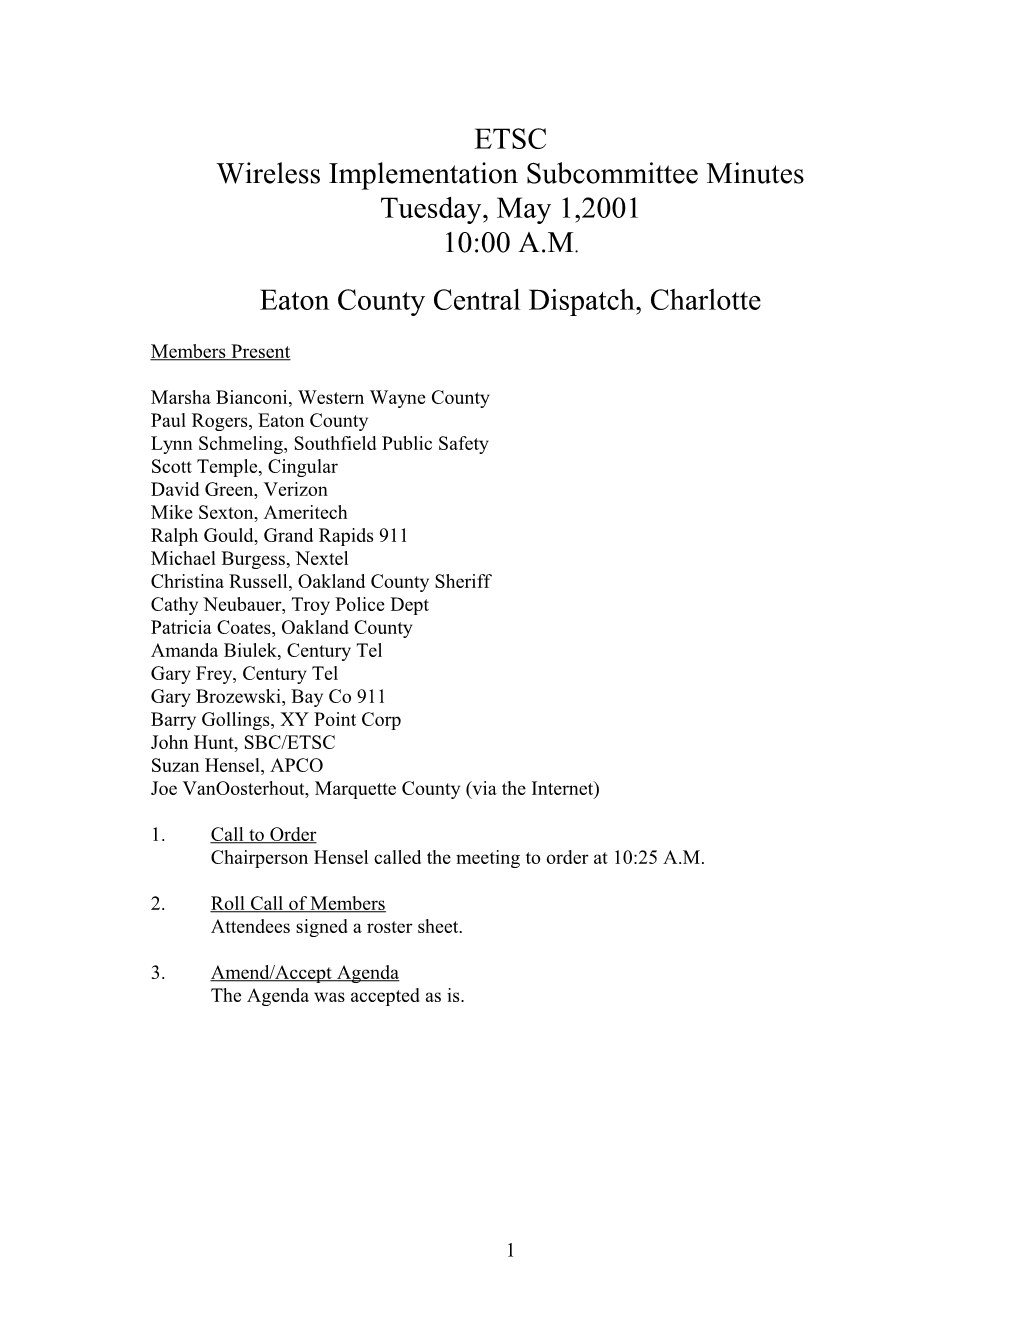 Wireless Implementation Subcommittee Minutes